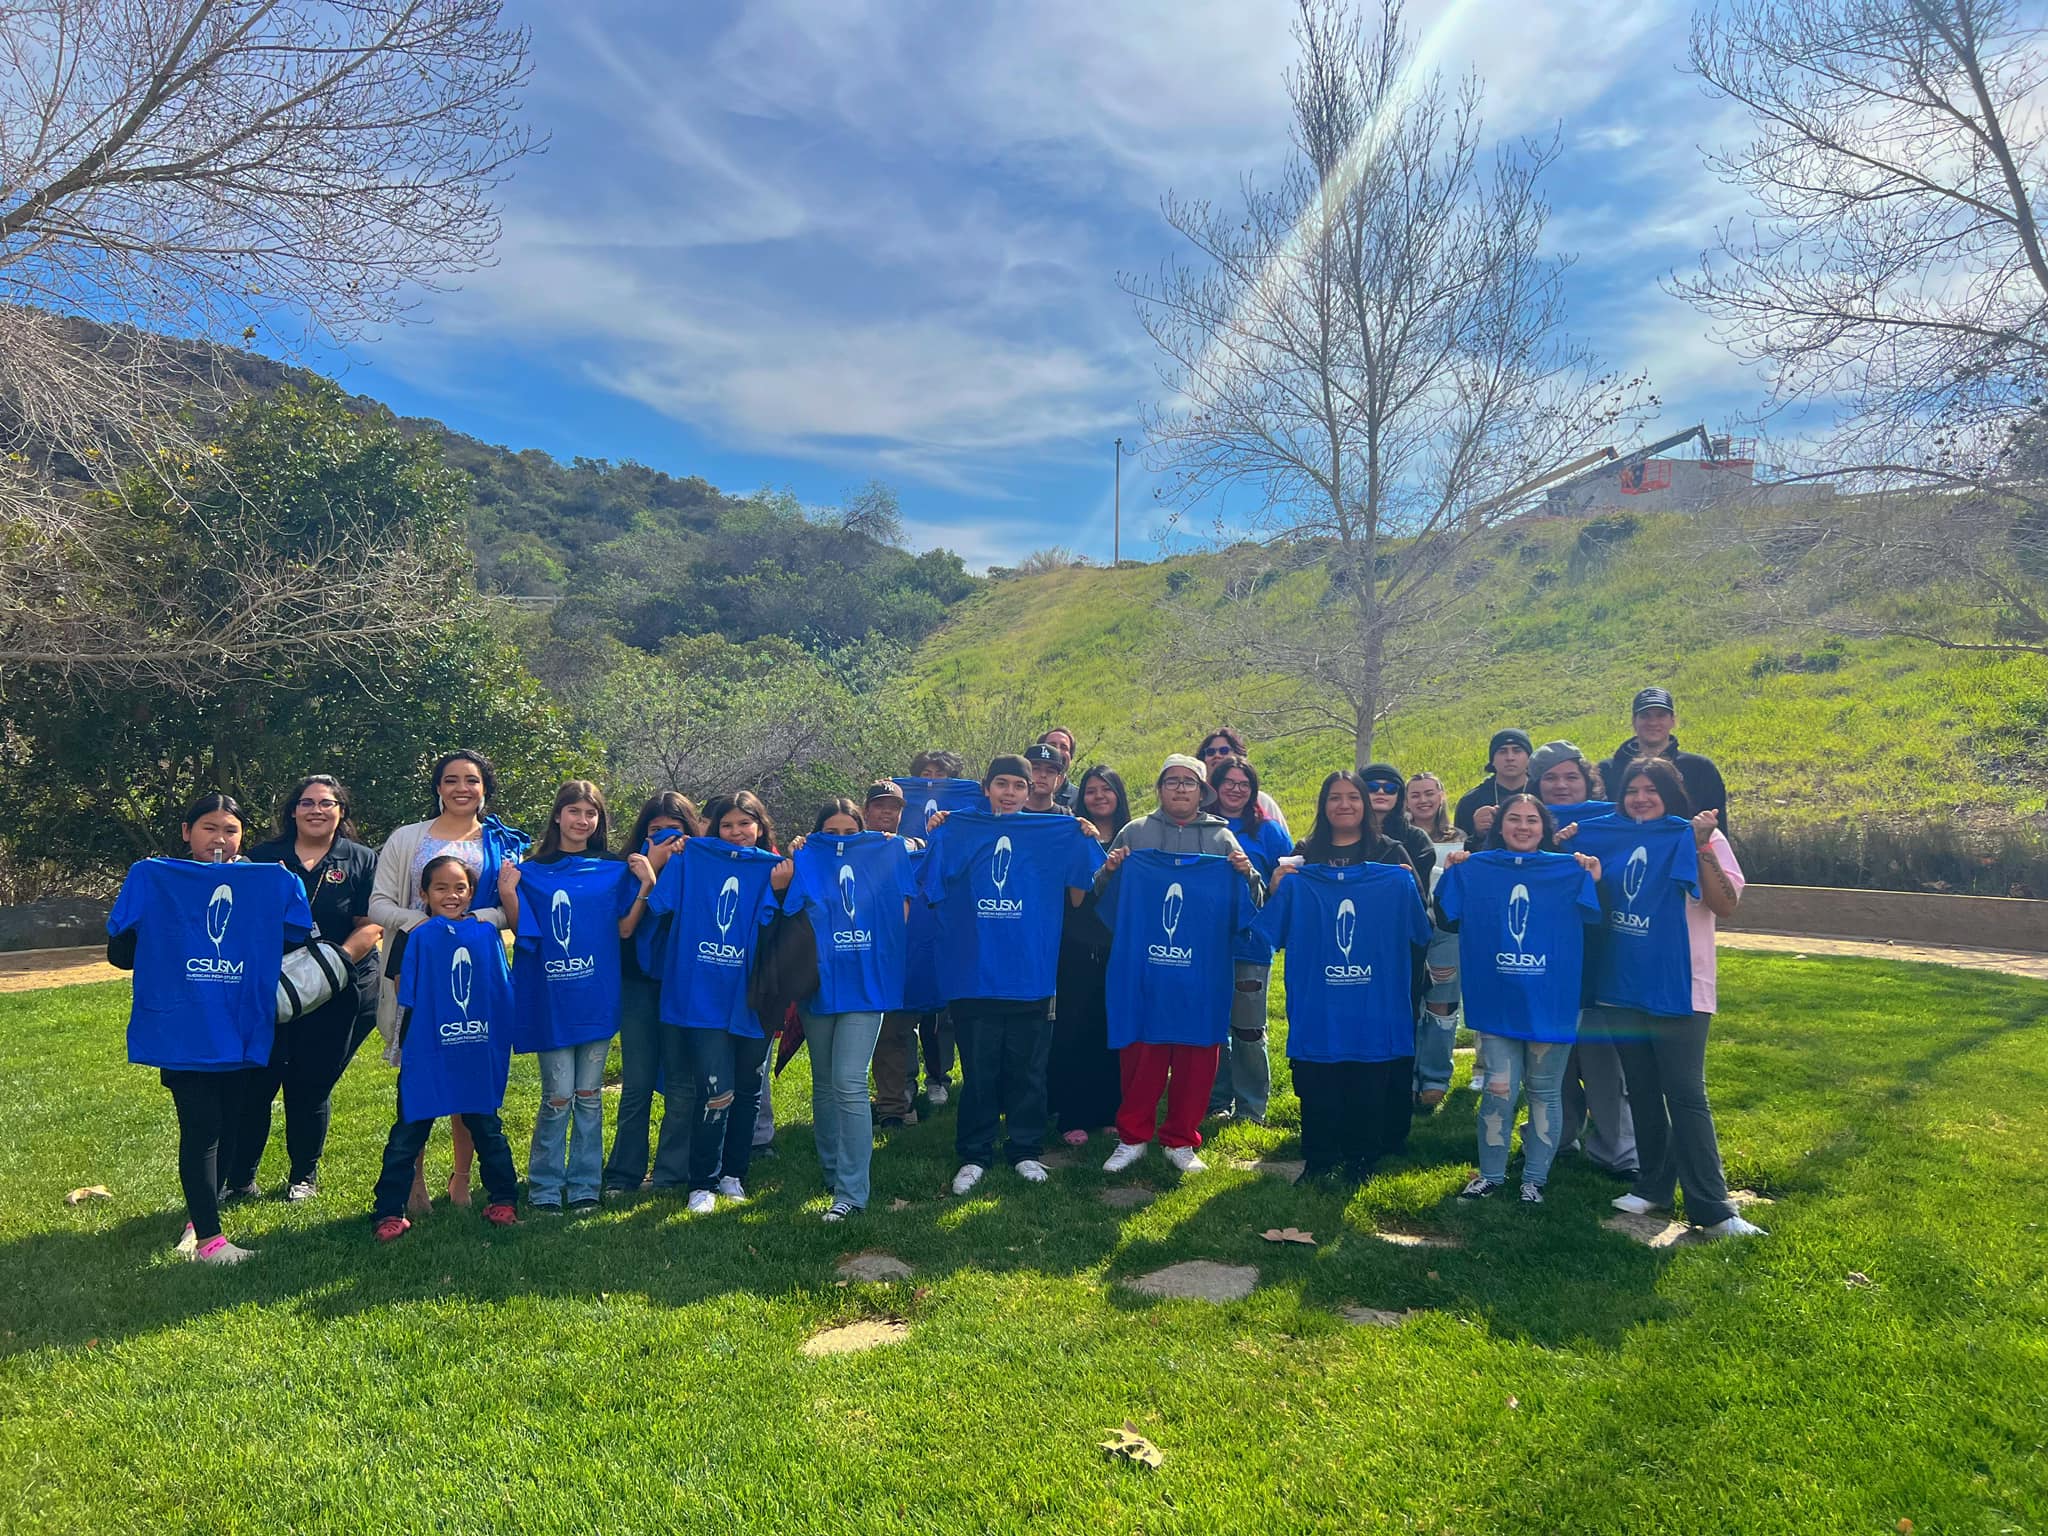 Group of children standing outside on bright green grass as they hold up blue CSUSM t-shirts that have a white feather graphic on them